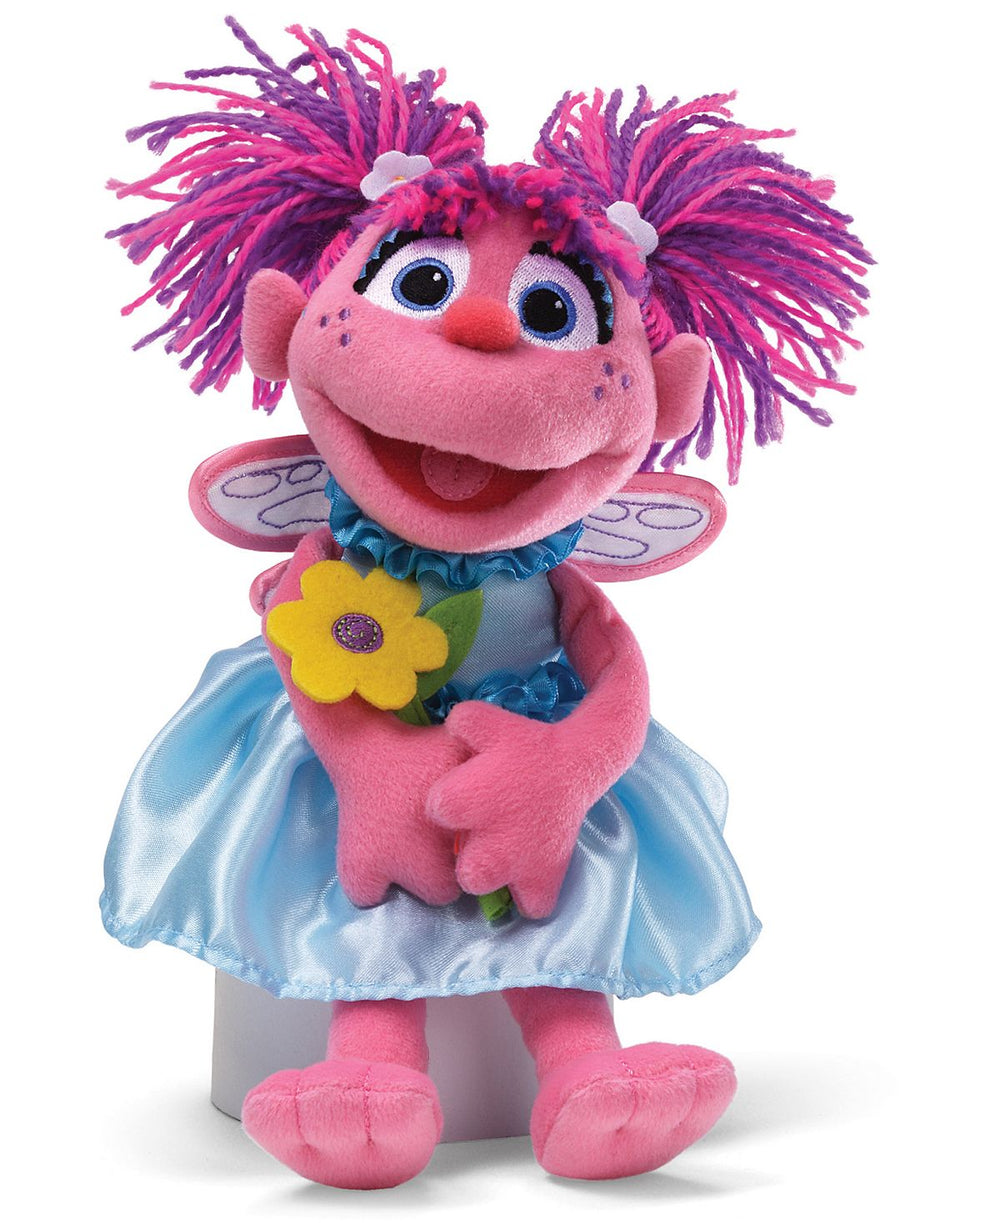 GUND Abby Cadabby 11 inch Plush with Iridescent Wings and Flower